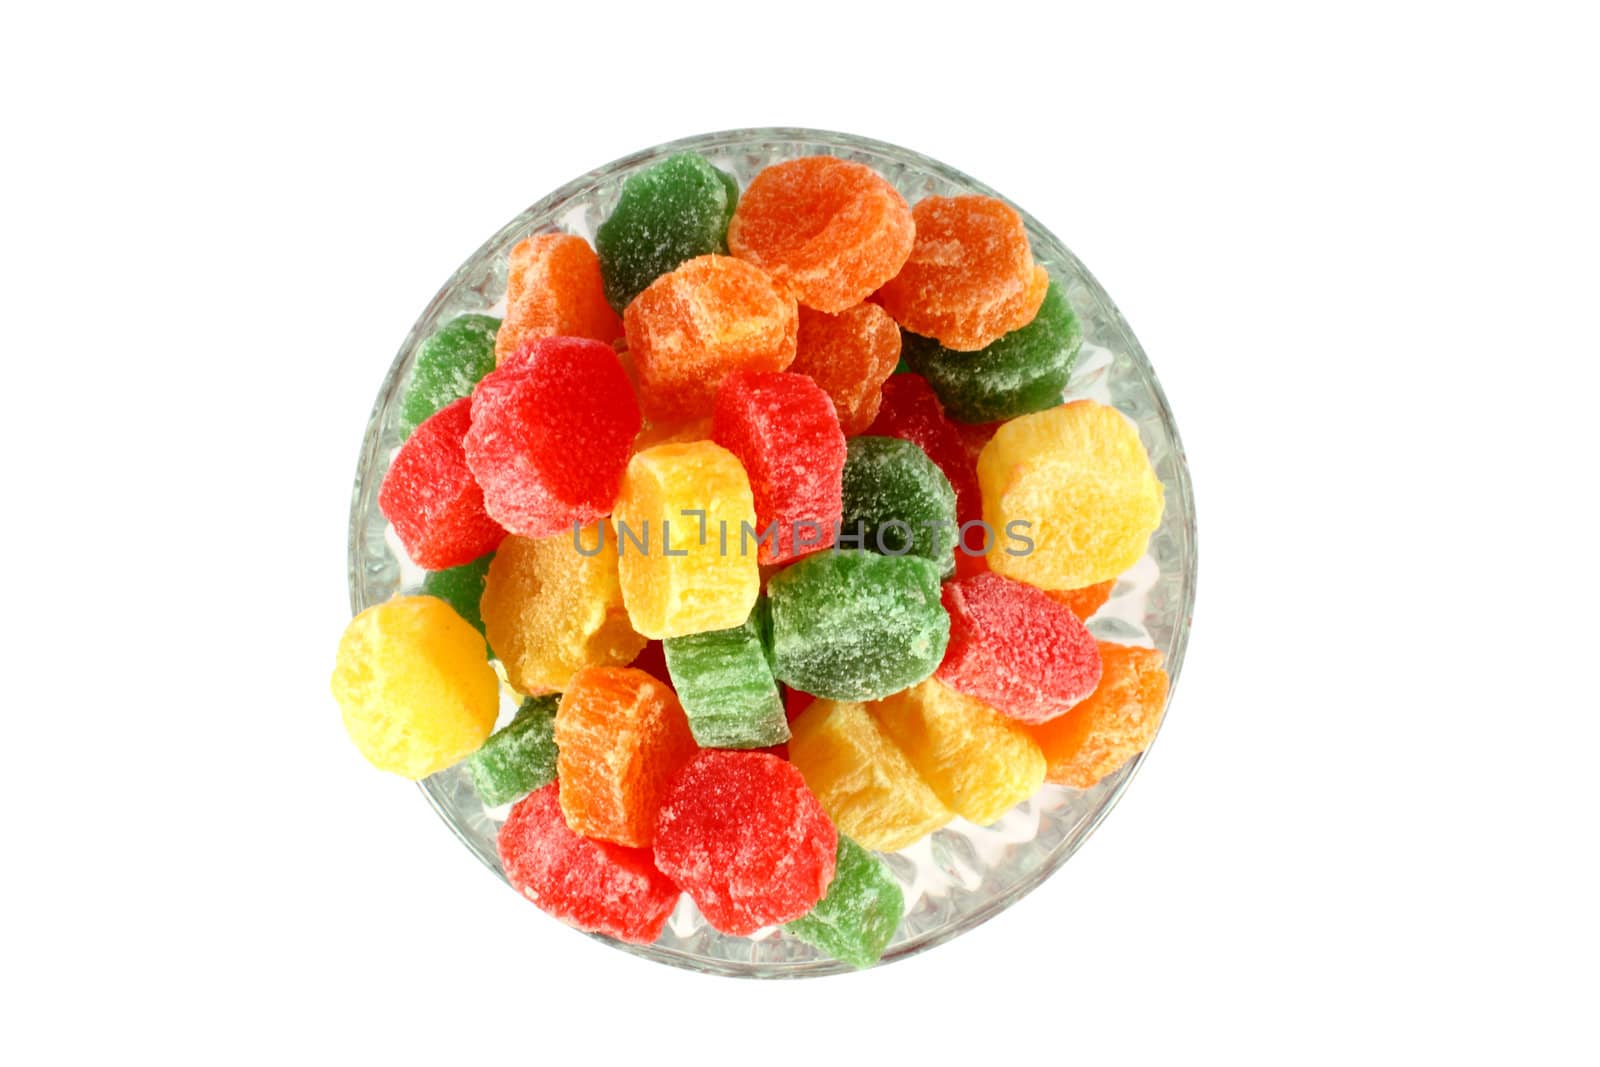 Colorful jelly candies in a glass bowl isolated on white